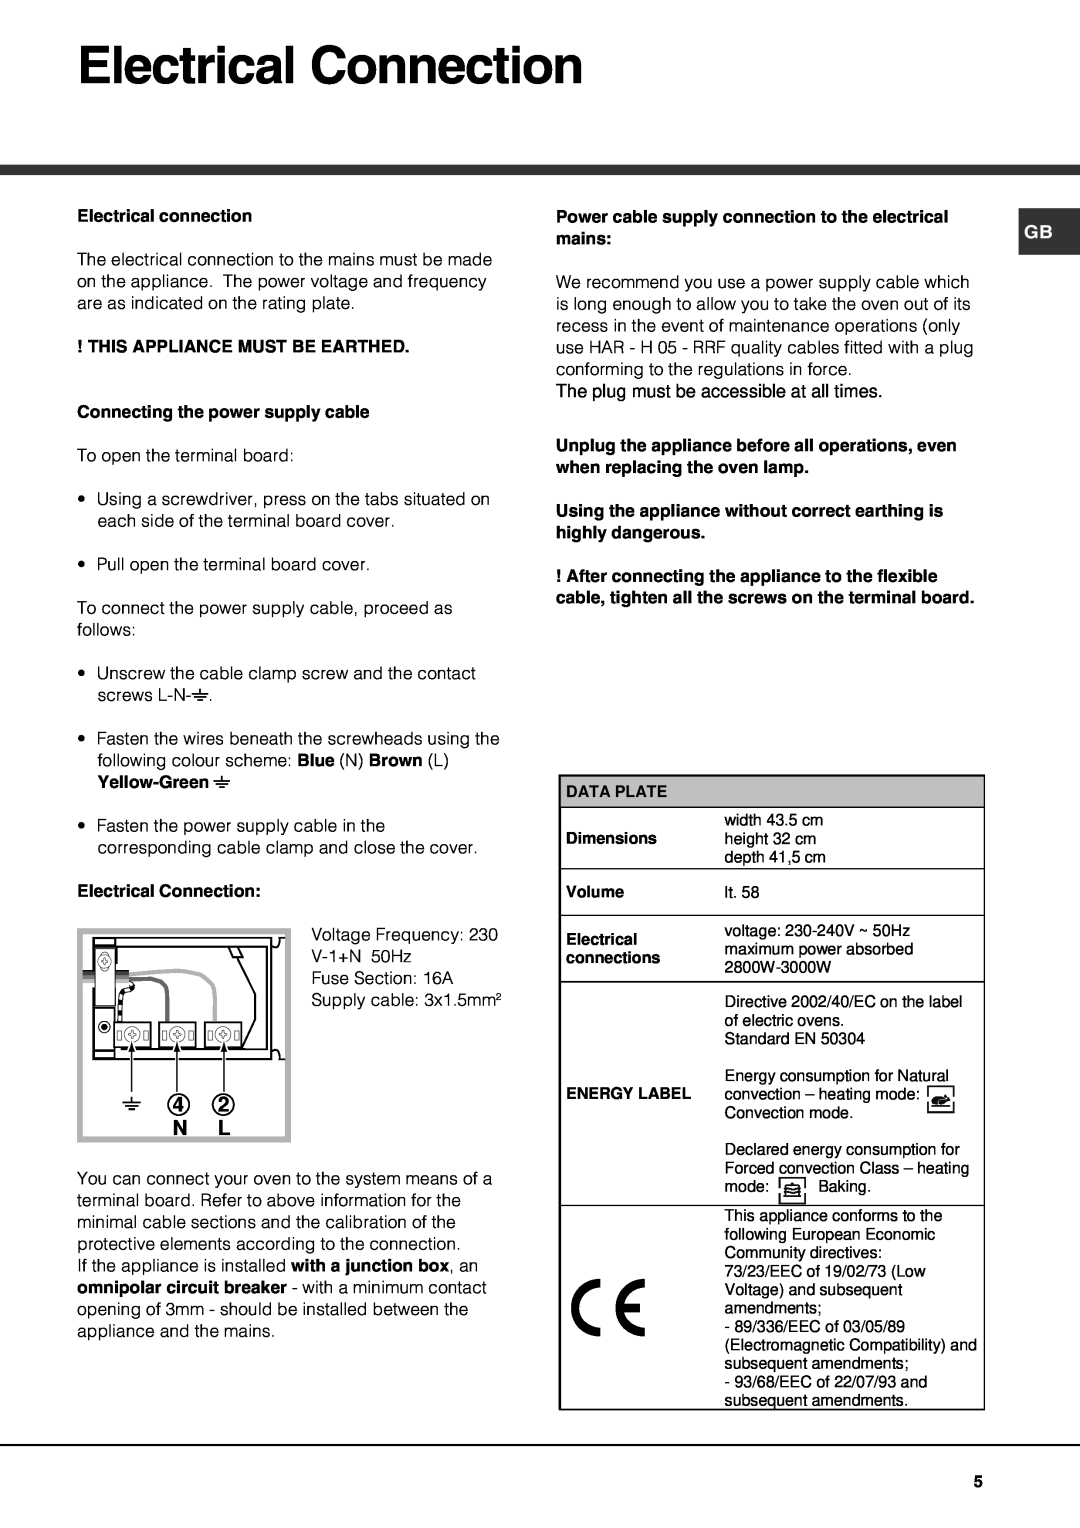 Hotpoint SQ872T - SE872X manual Electrical Connection, 4 2 N L 